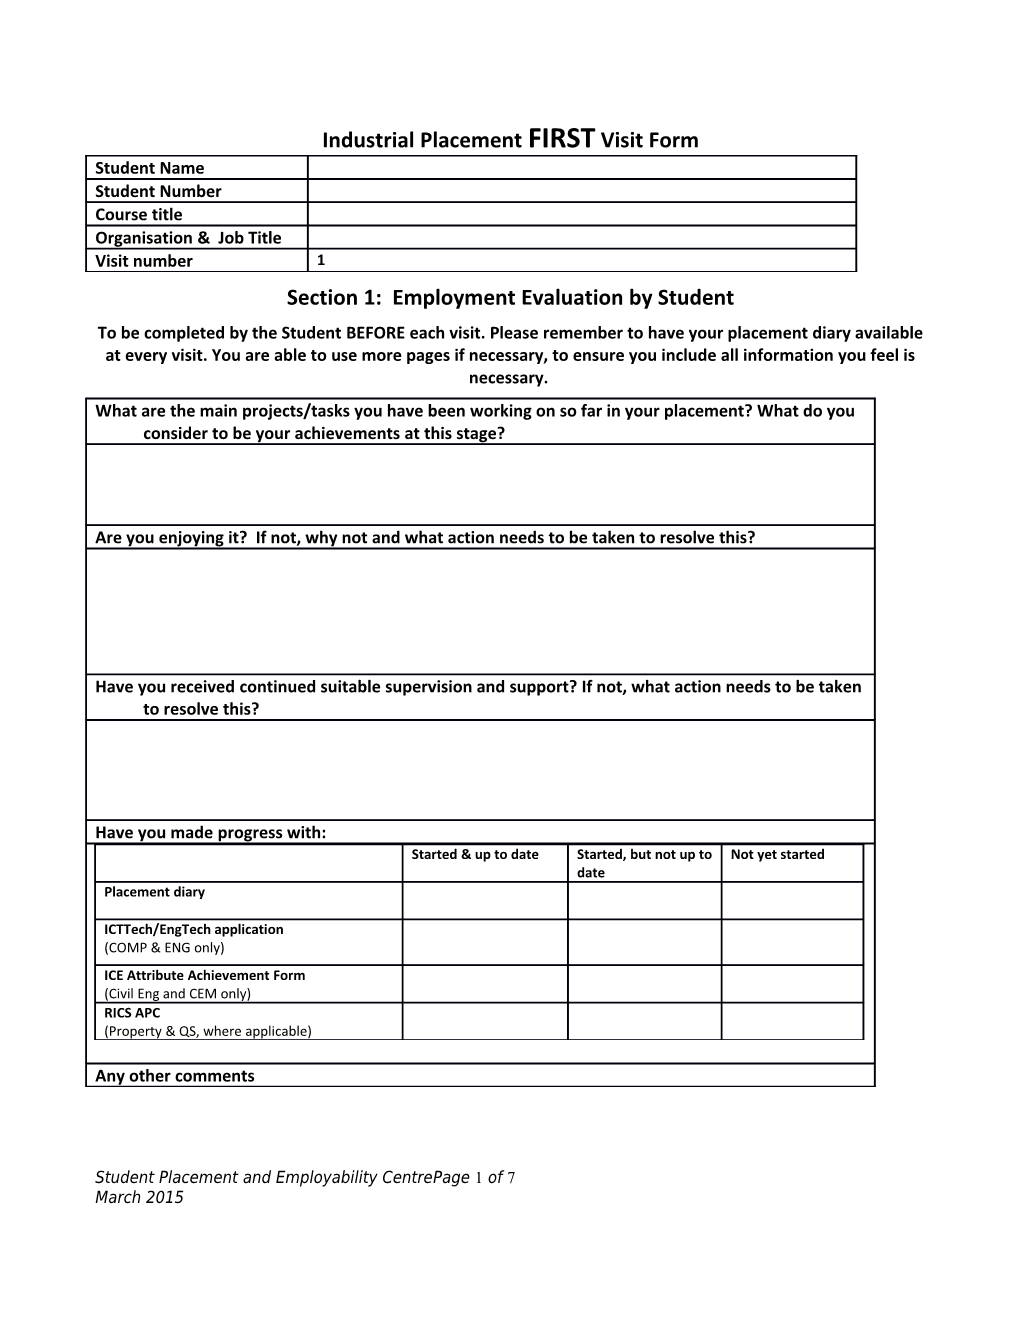 Industrial Placement Firstvisit Form